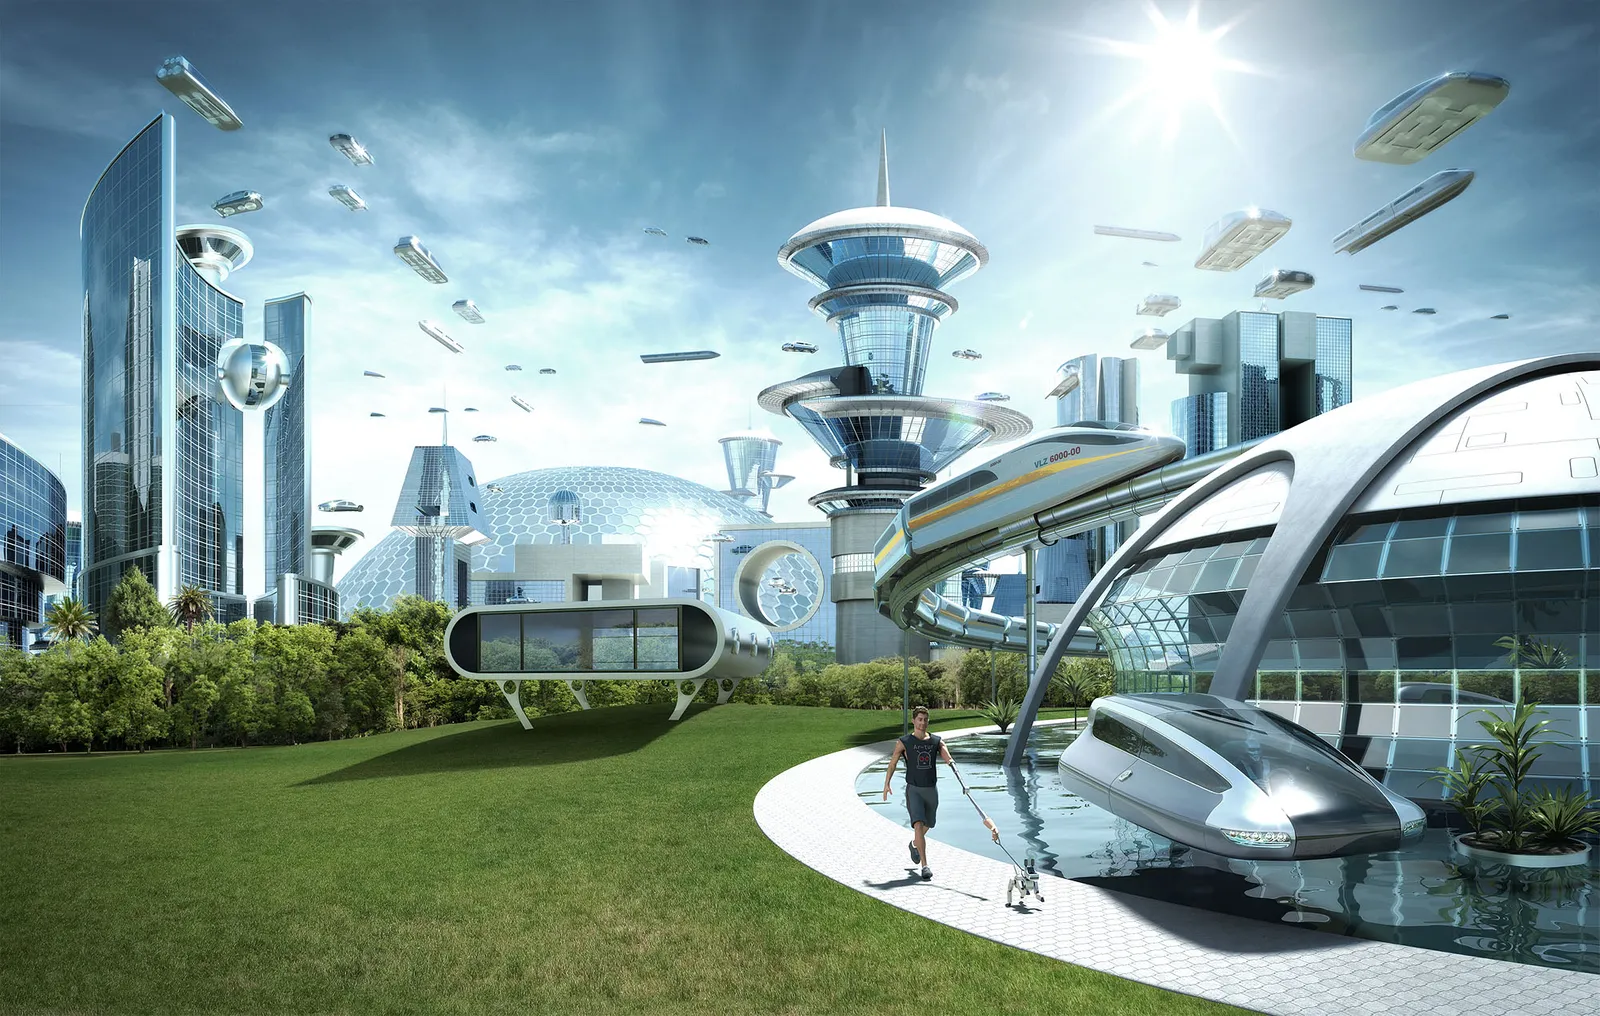 Thoughts of a Possible Future Utopia